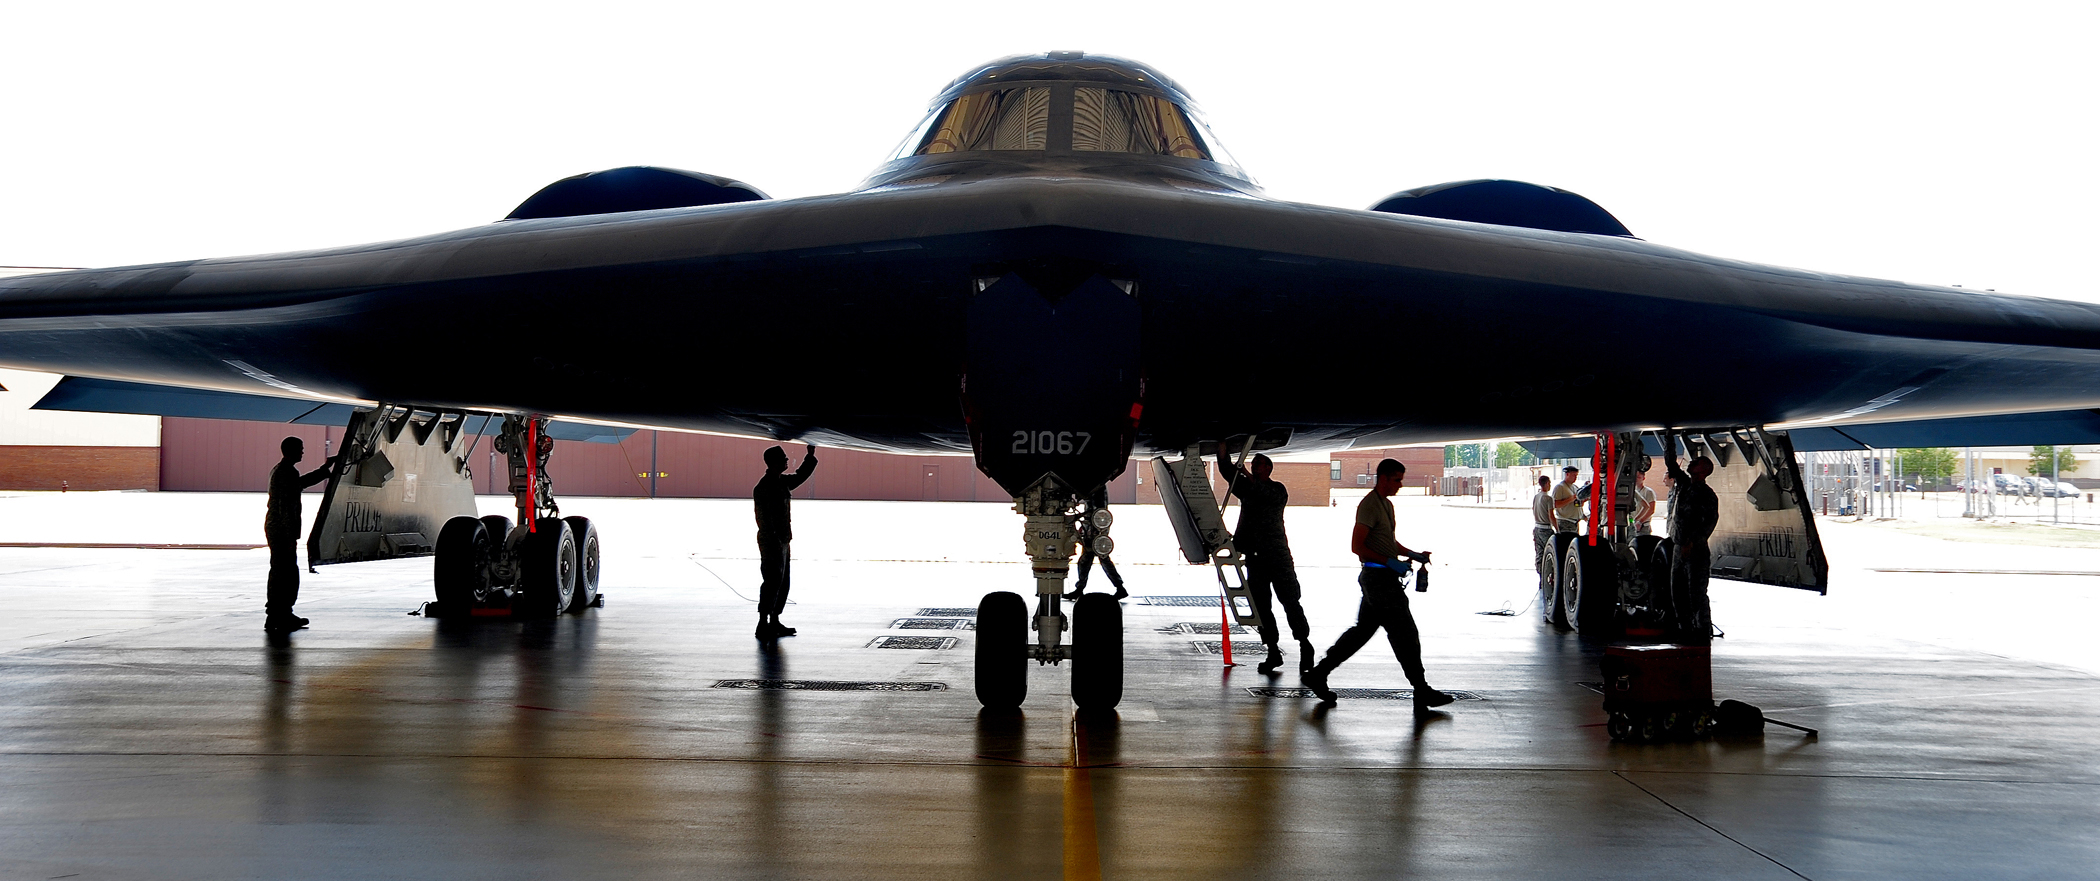 U. S. Air Force Airman are conducting maintenance on a Stealth Bomber.